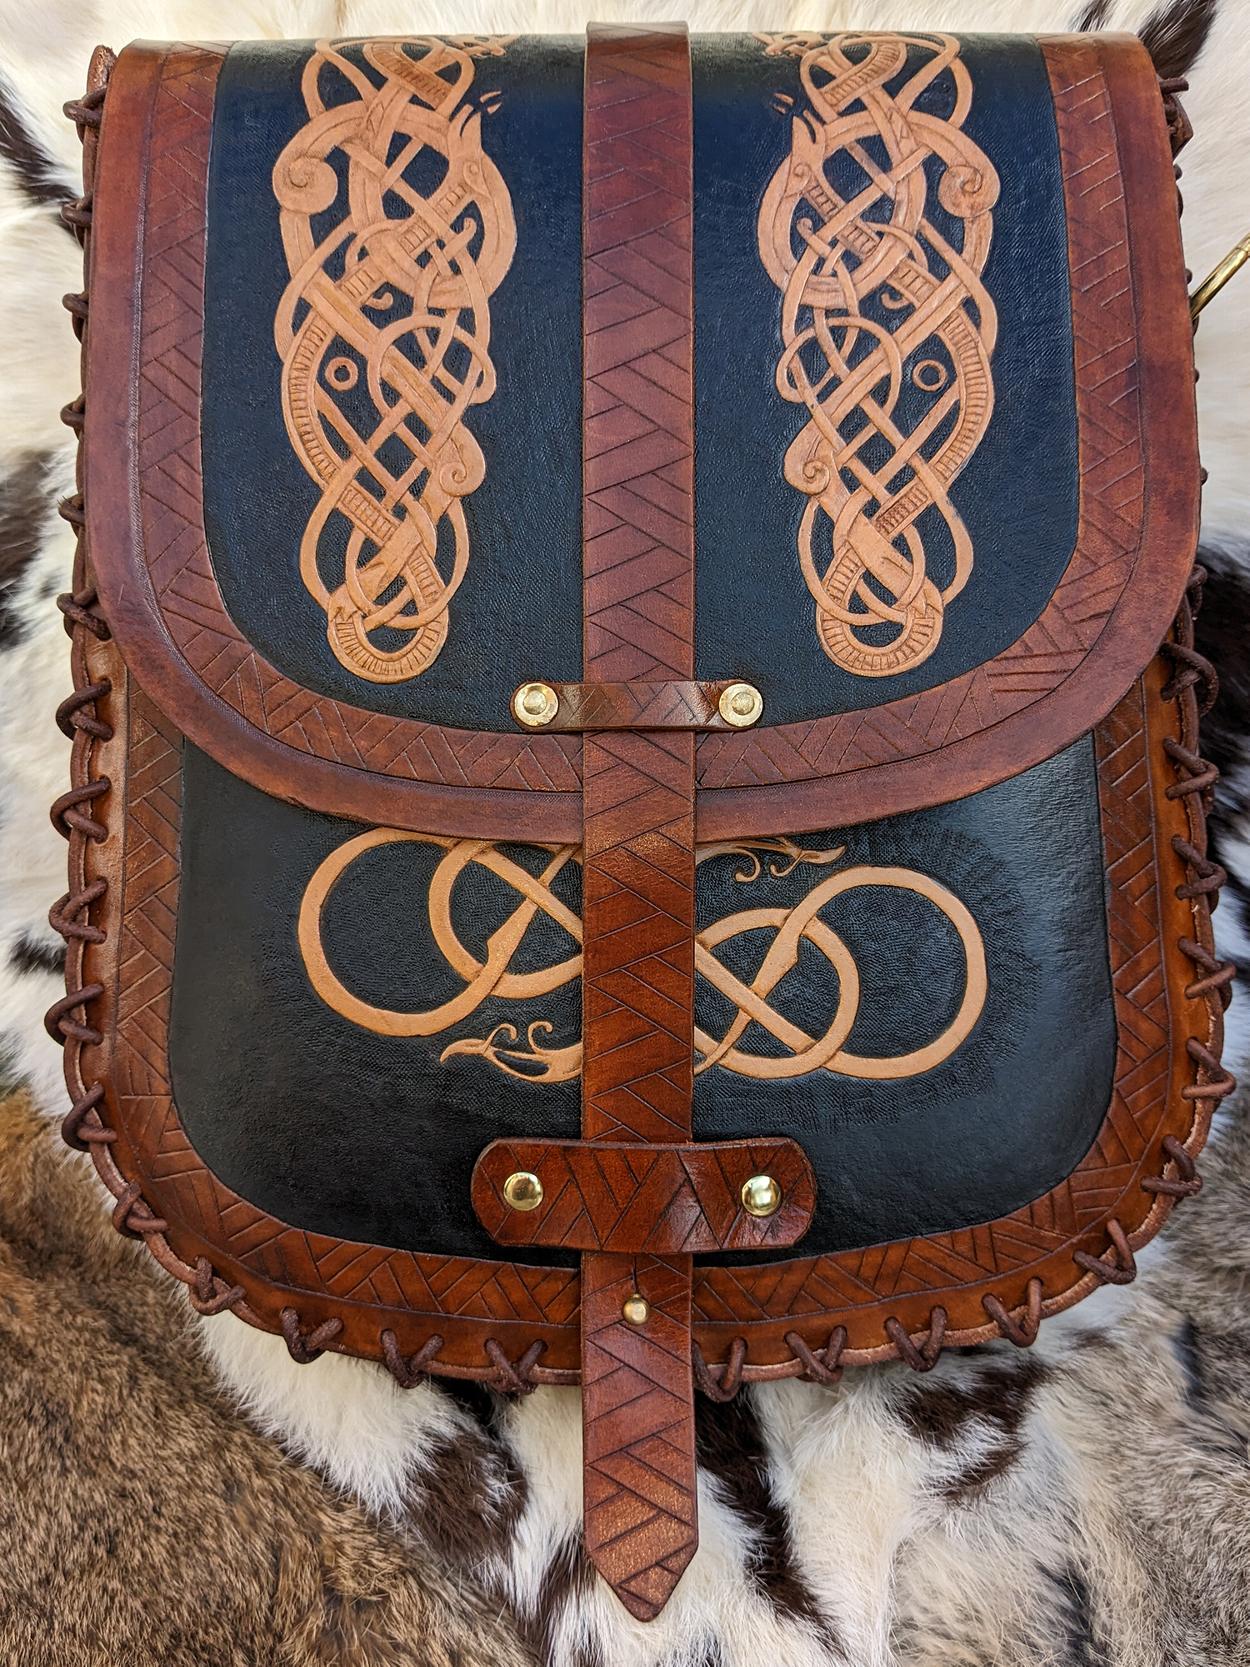 Hand crafted leather statue with Celtic styling